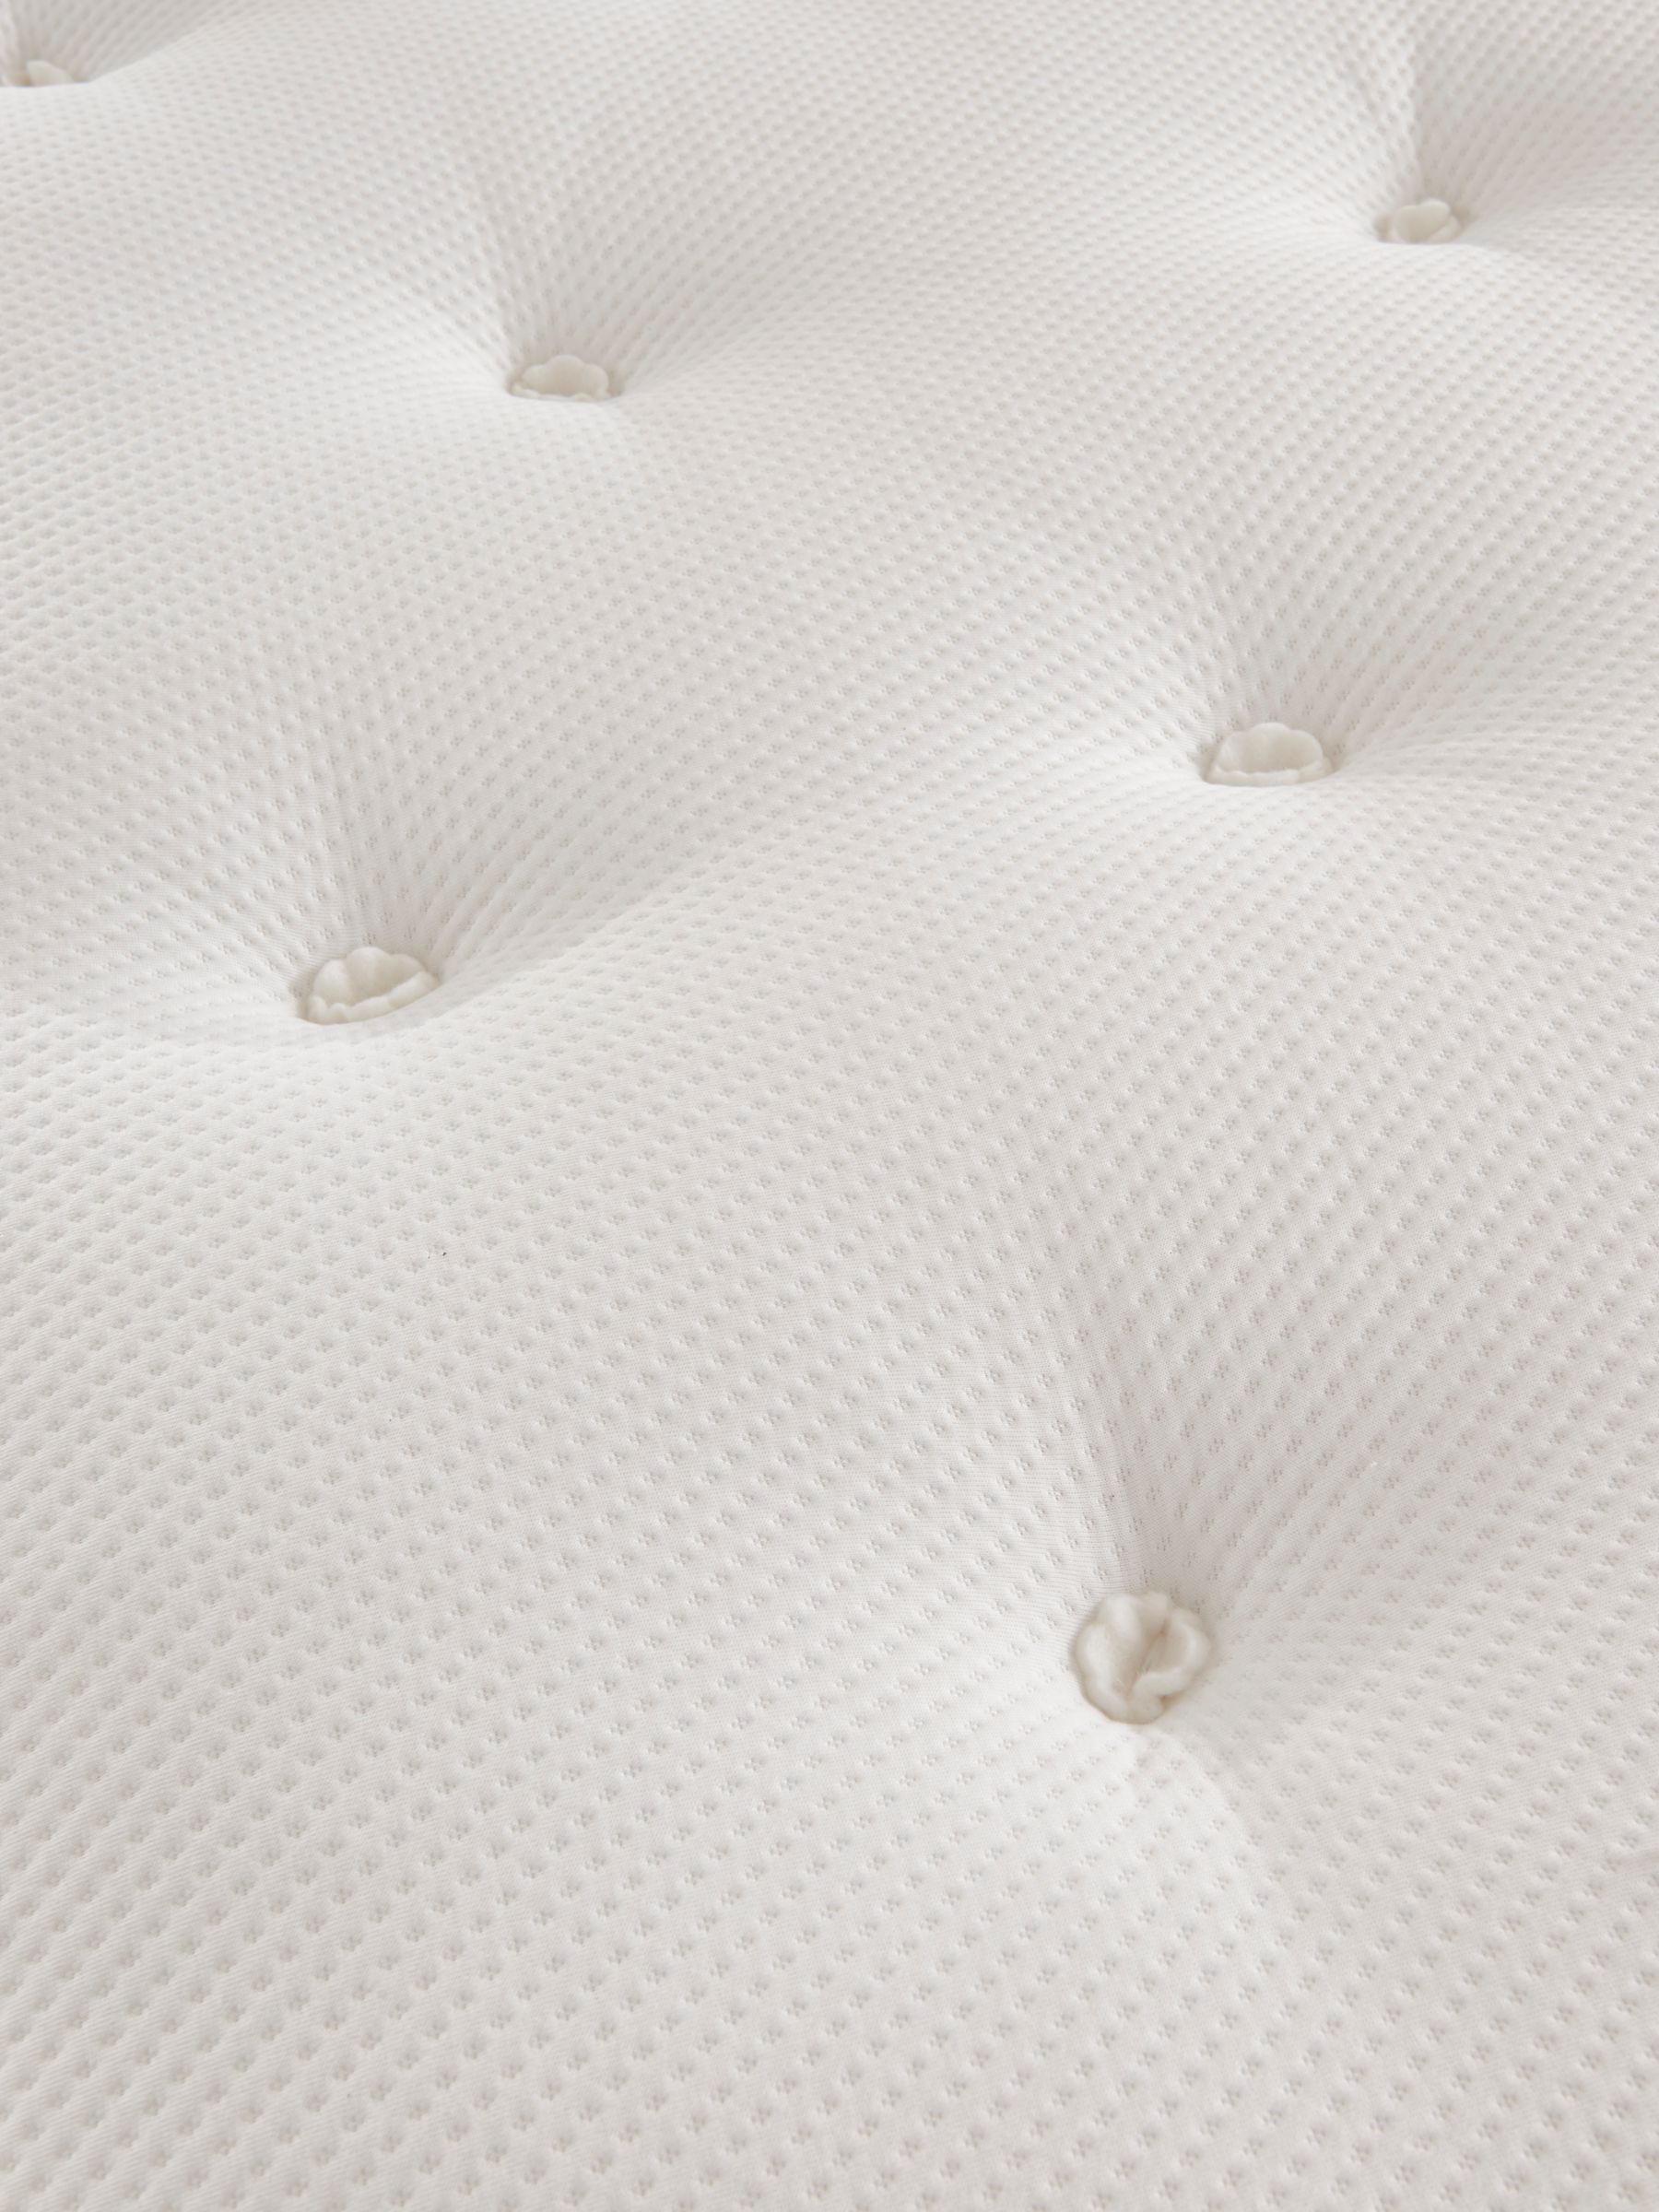 Photo of John lewis ortho support 2000 pocket spring mattress medium to firm tension single